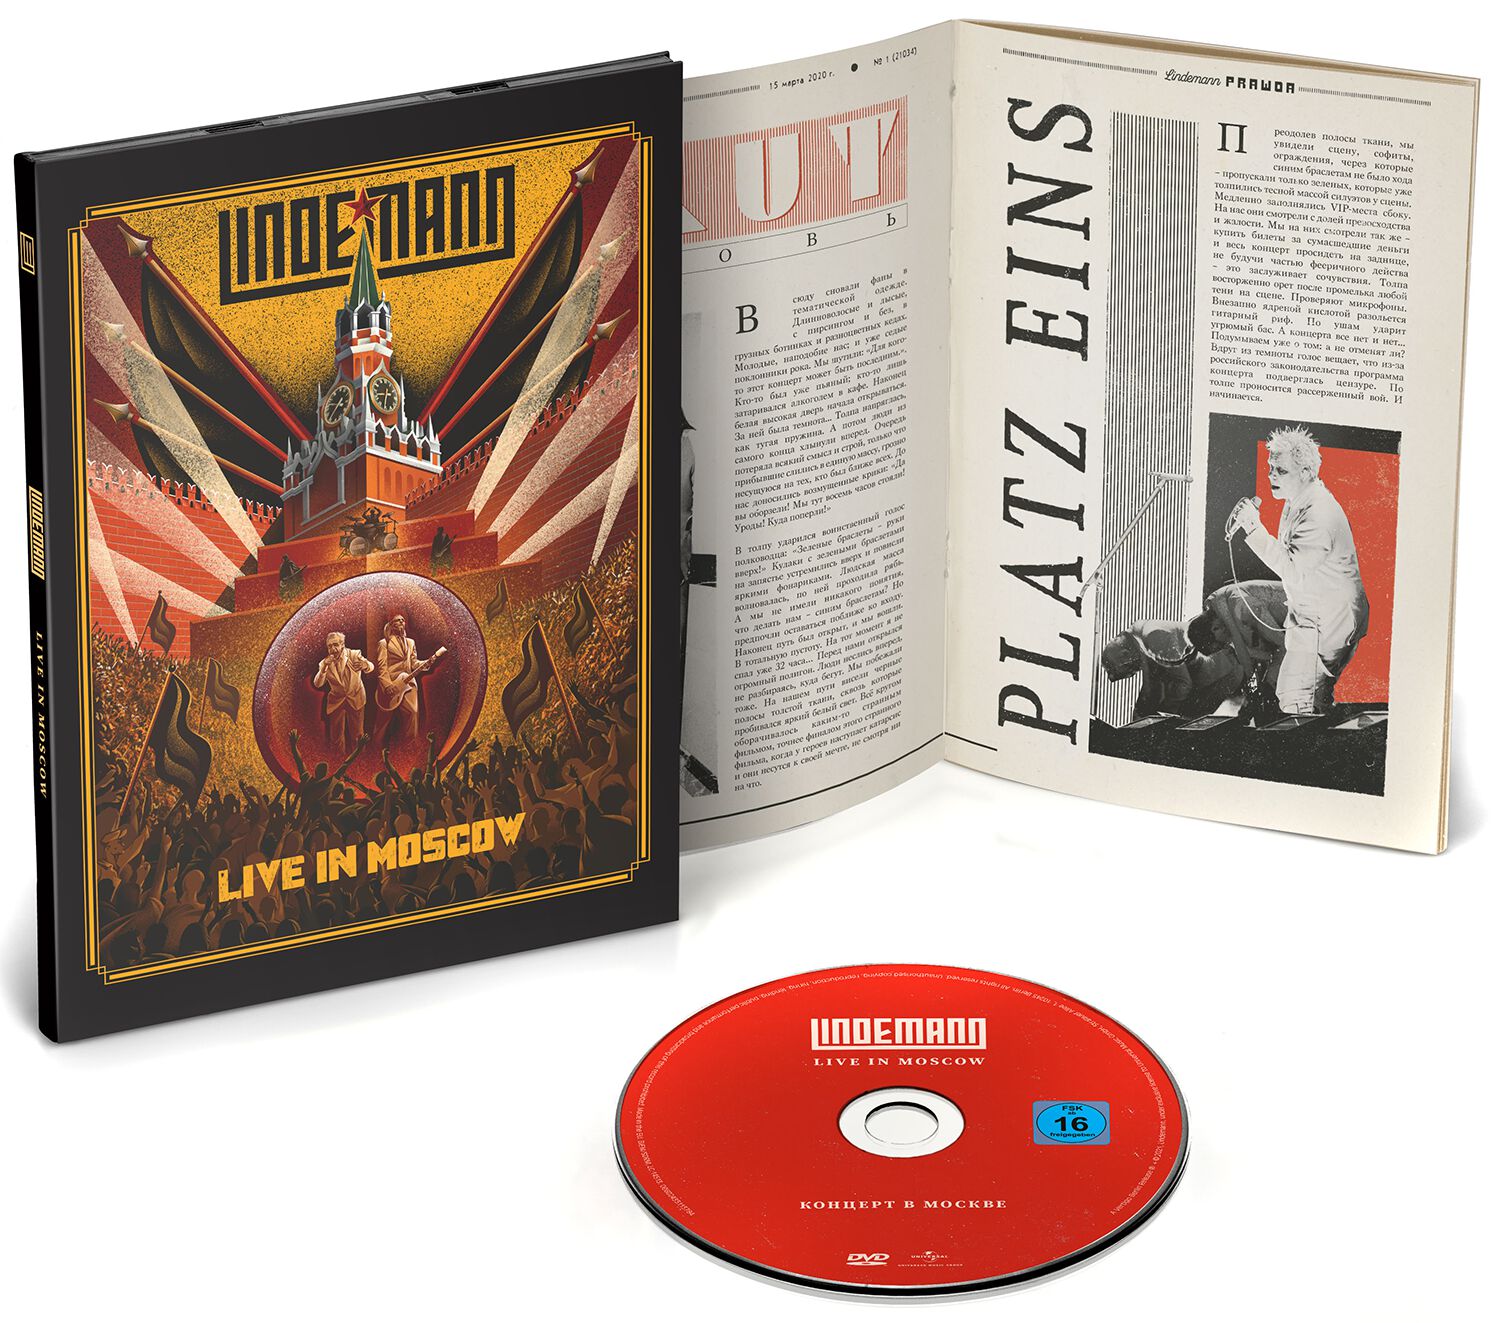 Image of Lindemann Live in Moscow DVD Standard